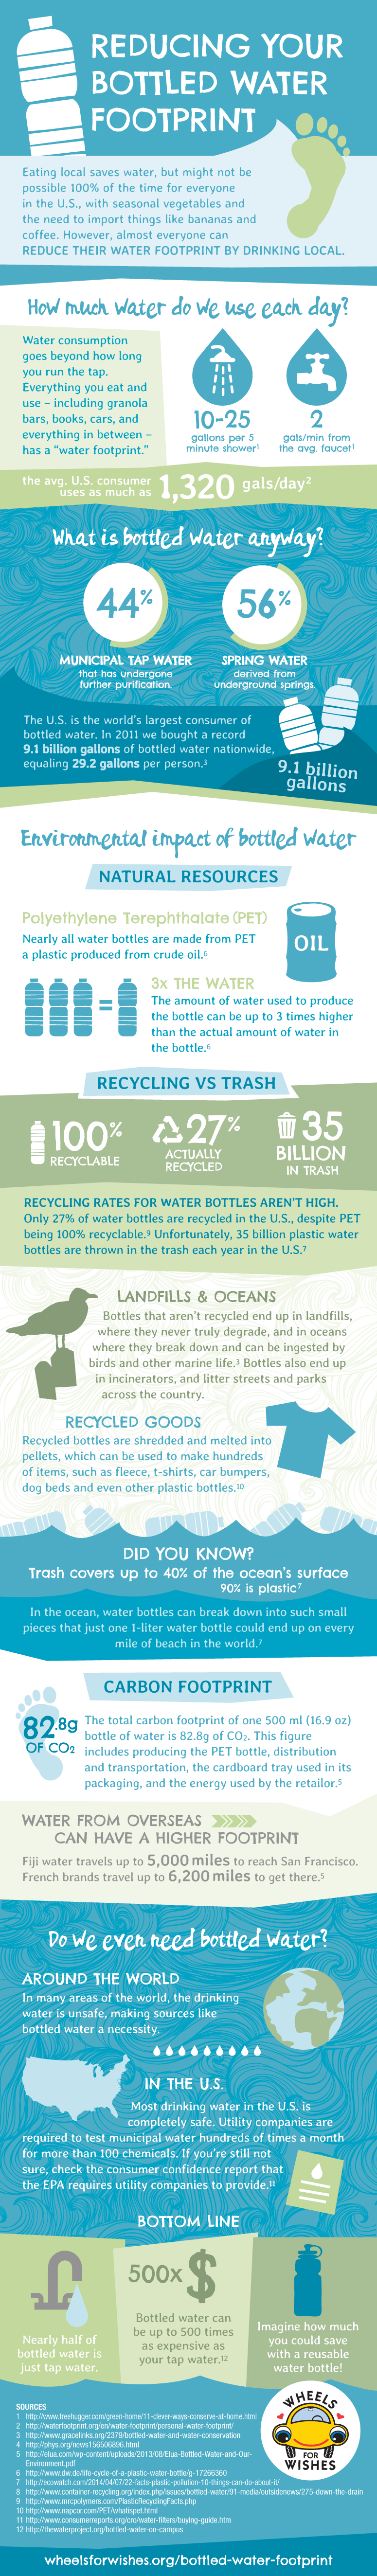 reduce your water footprint Reducing Your Bottled Water Footprint